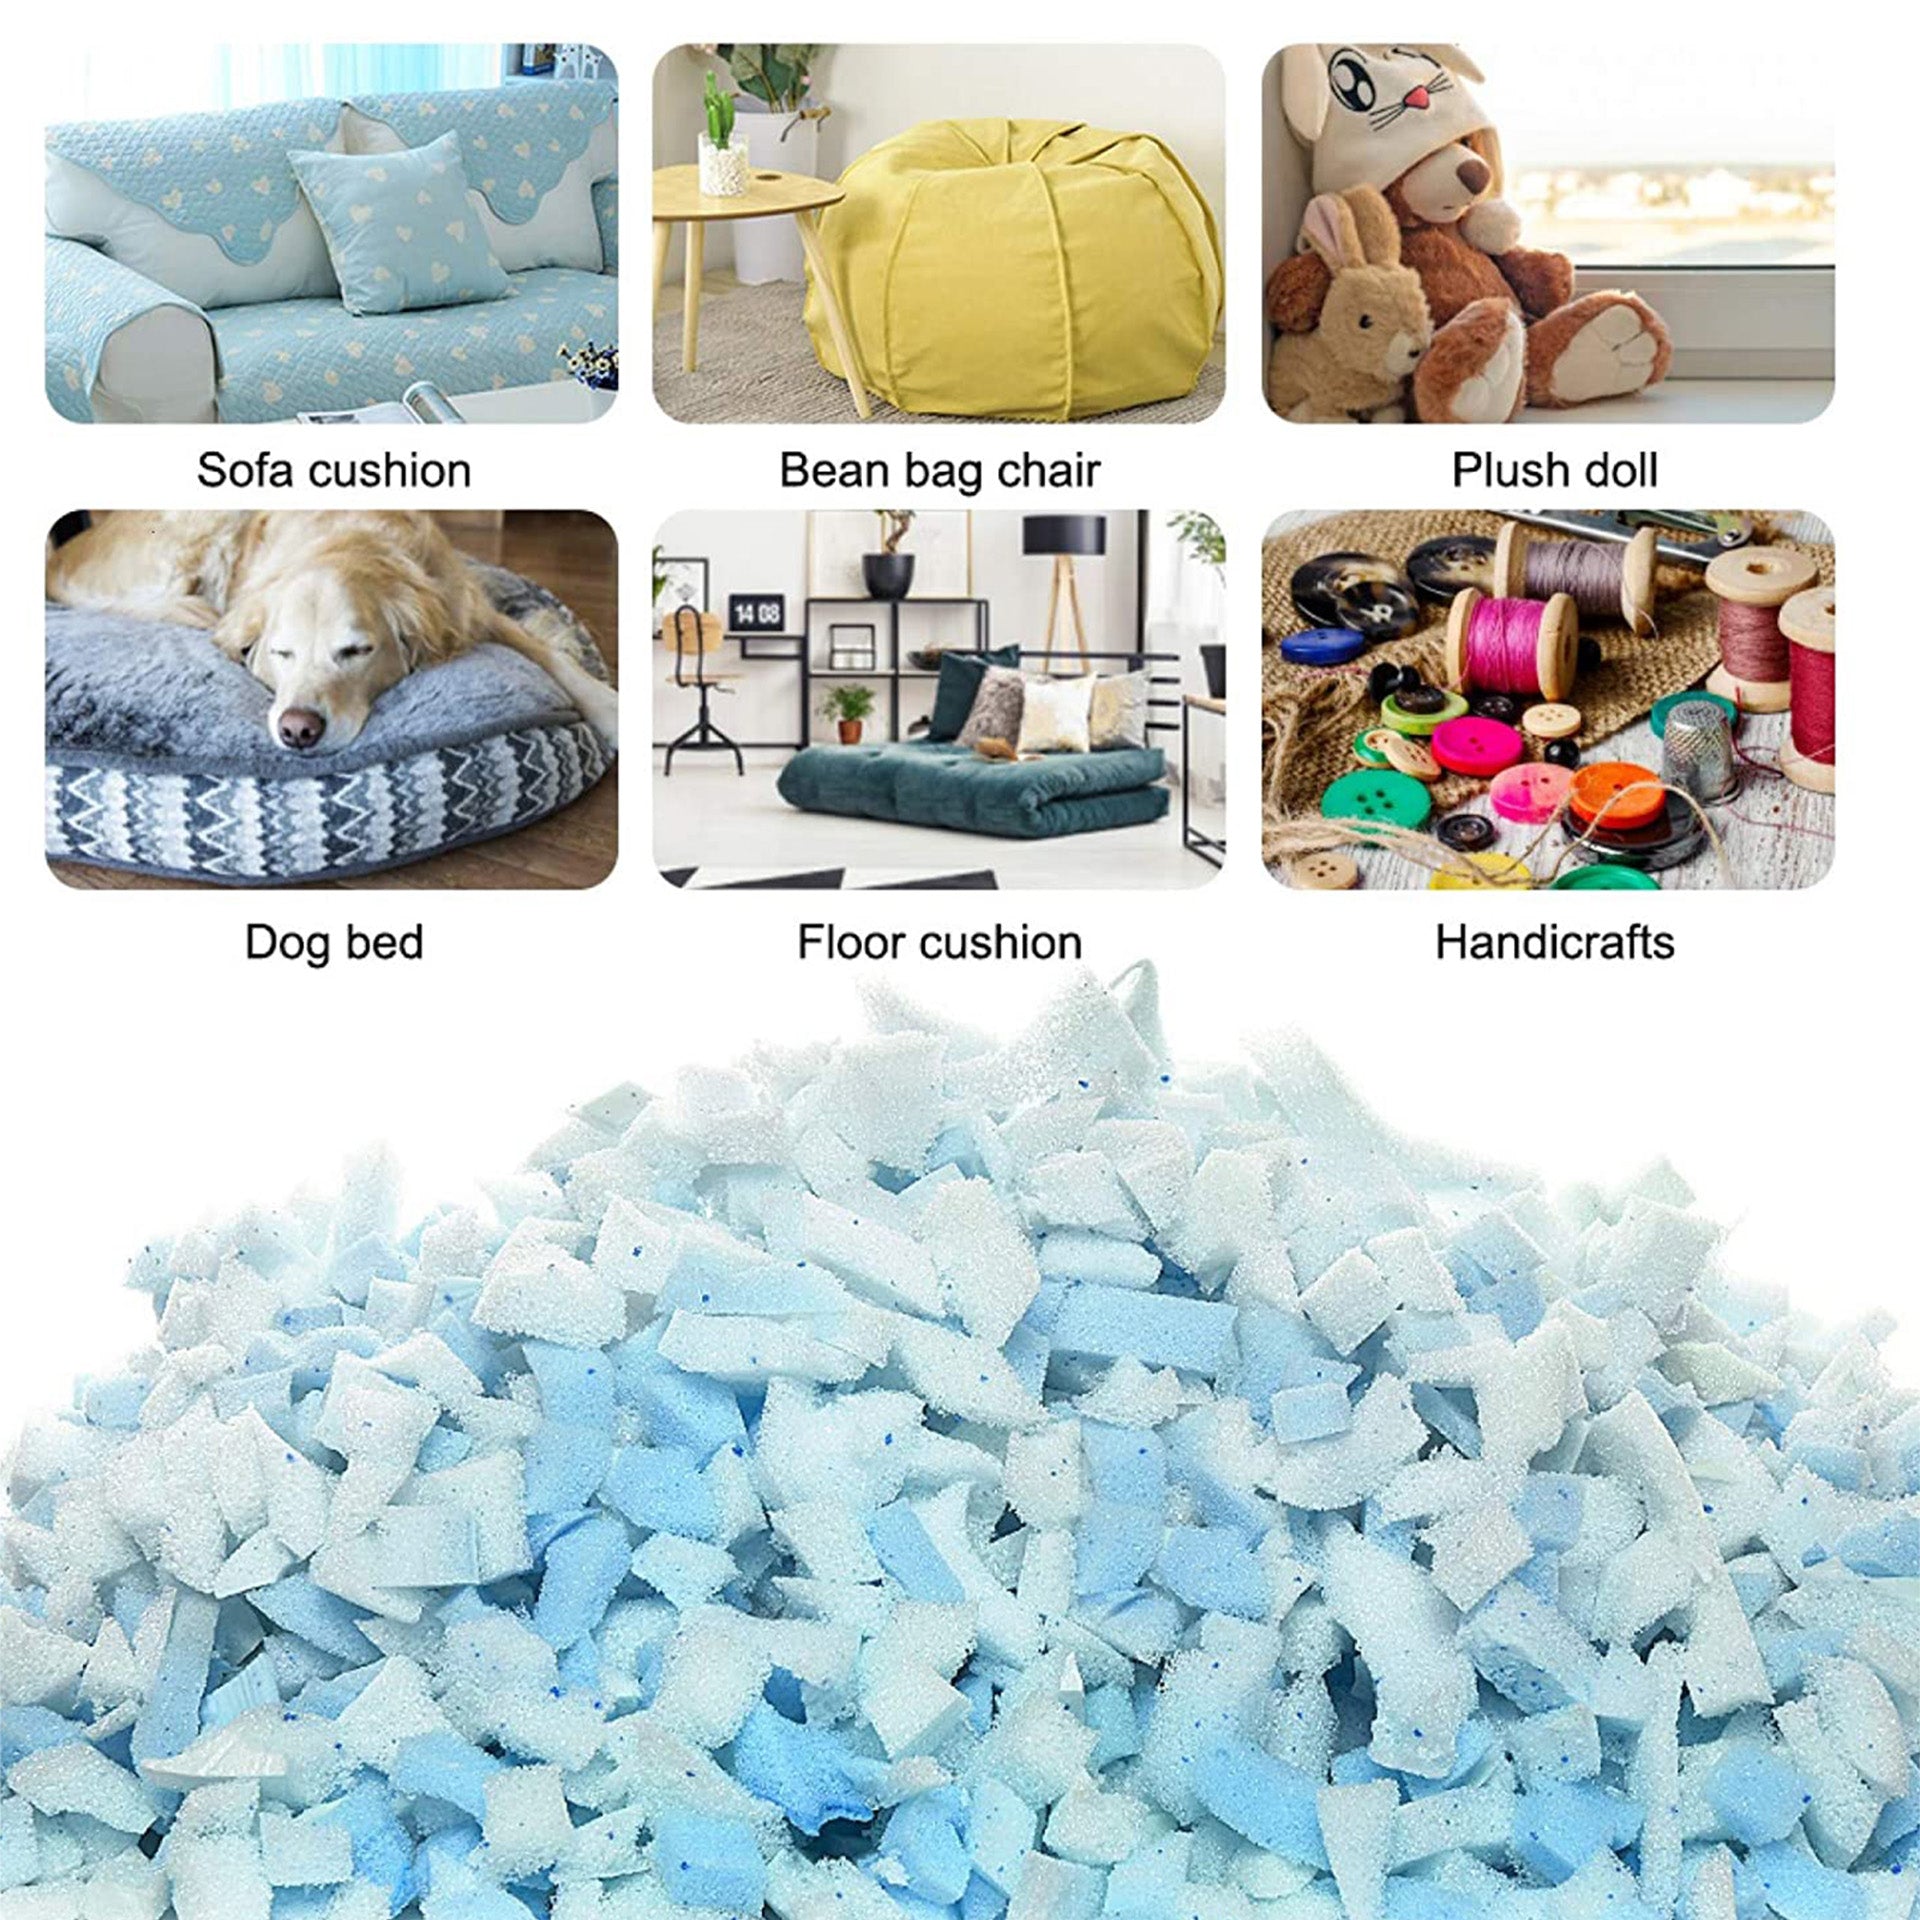  anzhixiu Bean Bag Stuffing Shredded Memory Foam 100% New,10  Pounds Stuffing for Bean Bag Chairs, Stuffed Animals, Dog Bed & Couch  Cushion Filling, White Color : Home & Kitchen